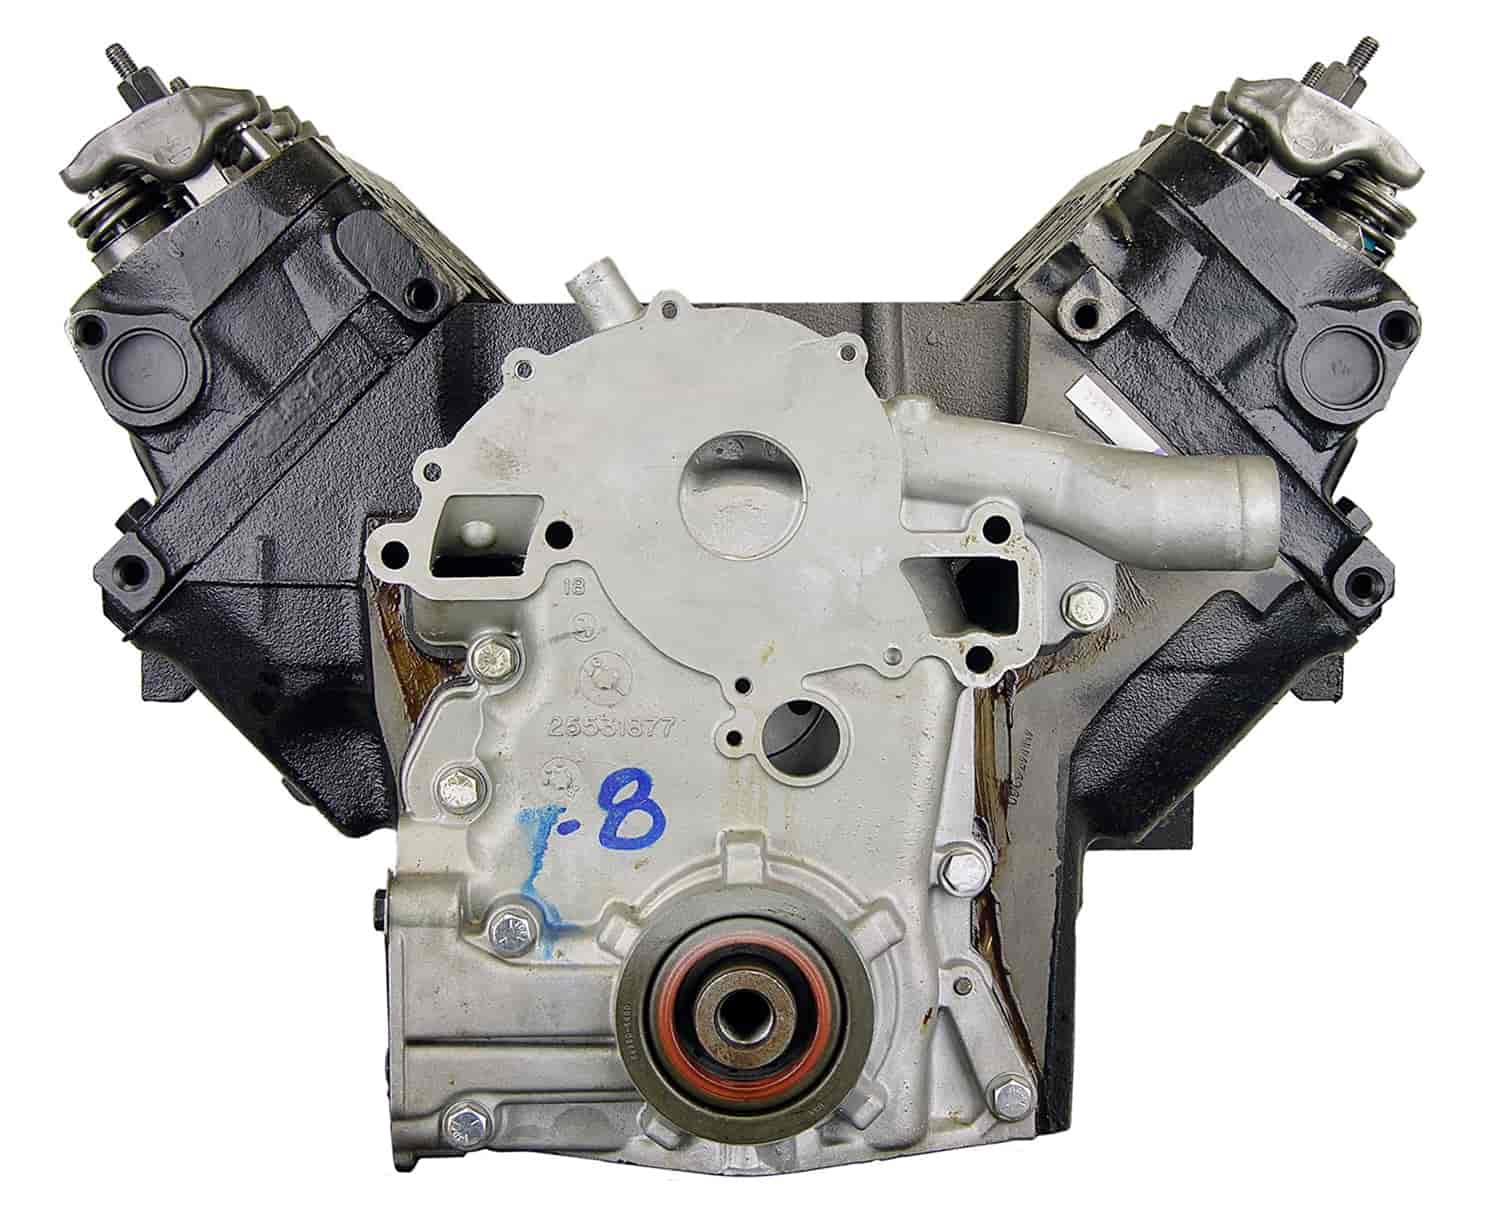 Remanufactured Crate Engine for 1986-1988 Buick/Olds/Pontiac with 3.8L V6